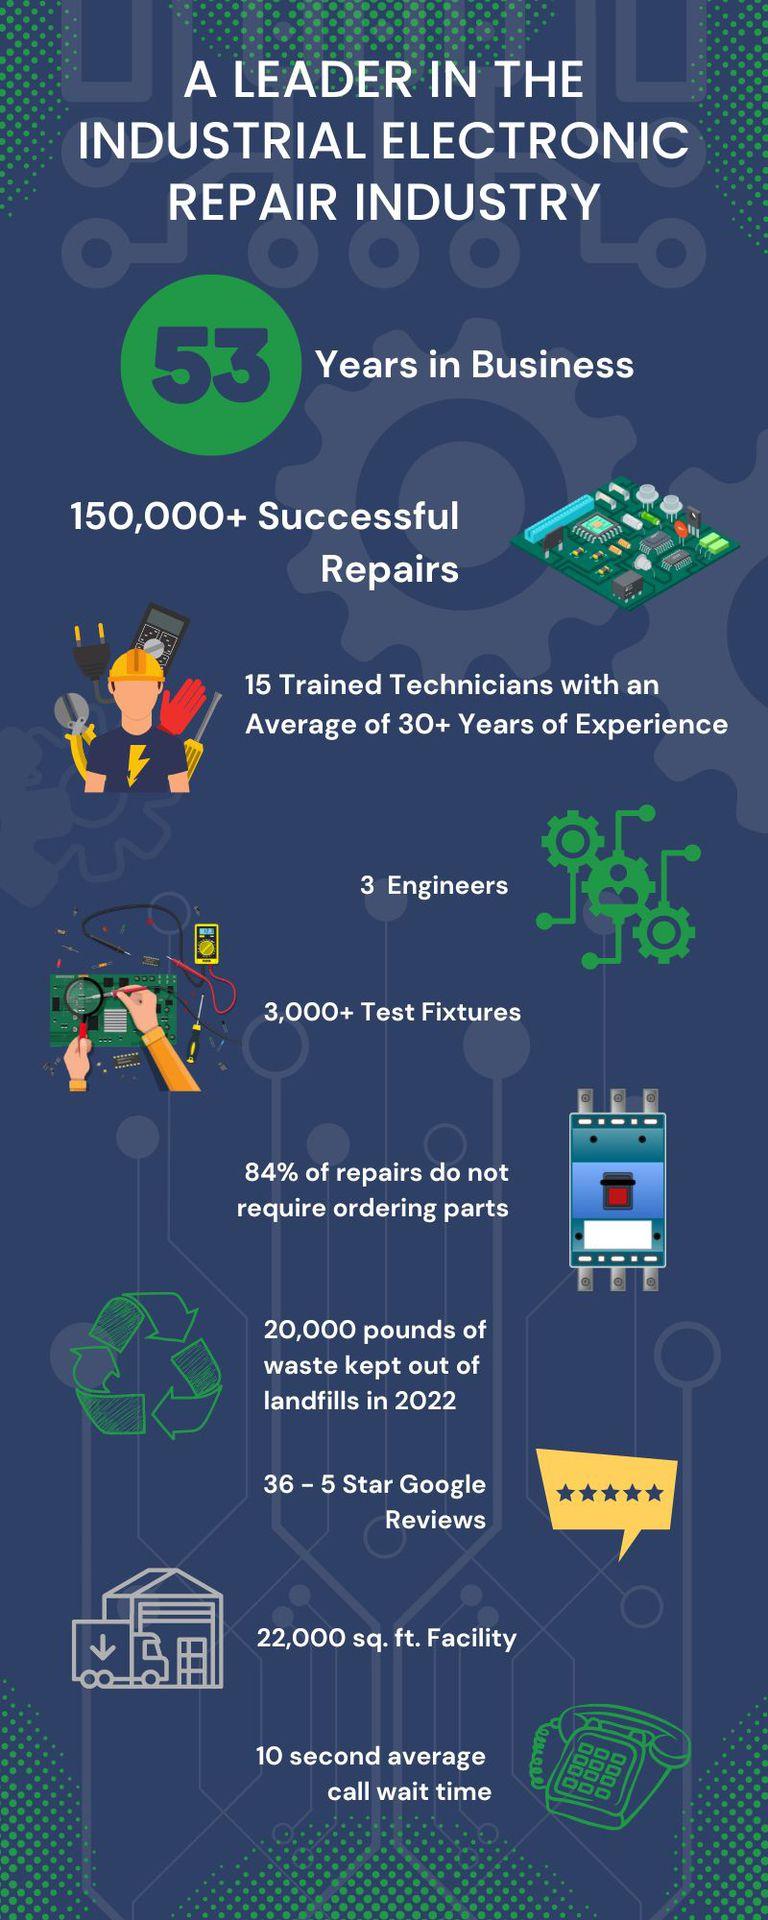 Inforgraphic with info from Control System Labs: 53 years in business, 150,000+ successful repairs, 15 trained technicians with an average of 30+ years of experience, 3 engineers, 3,000+ test fixtures, 84% of repairs do not require ordering parts, 20,000 pounds of waste kept out of landfills in 2022, 36 5-star Google reviews, 22,000 square foot facility, 10 second average call wait time.